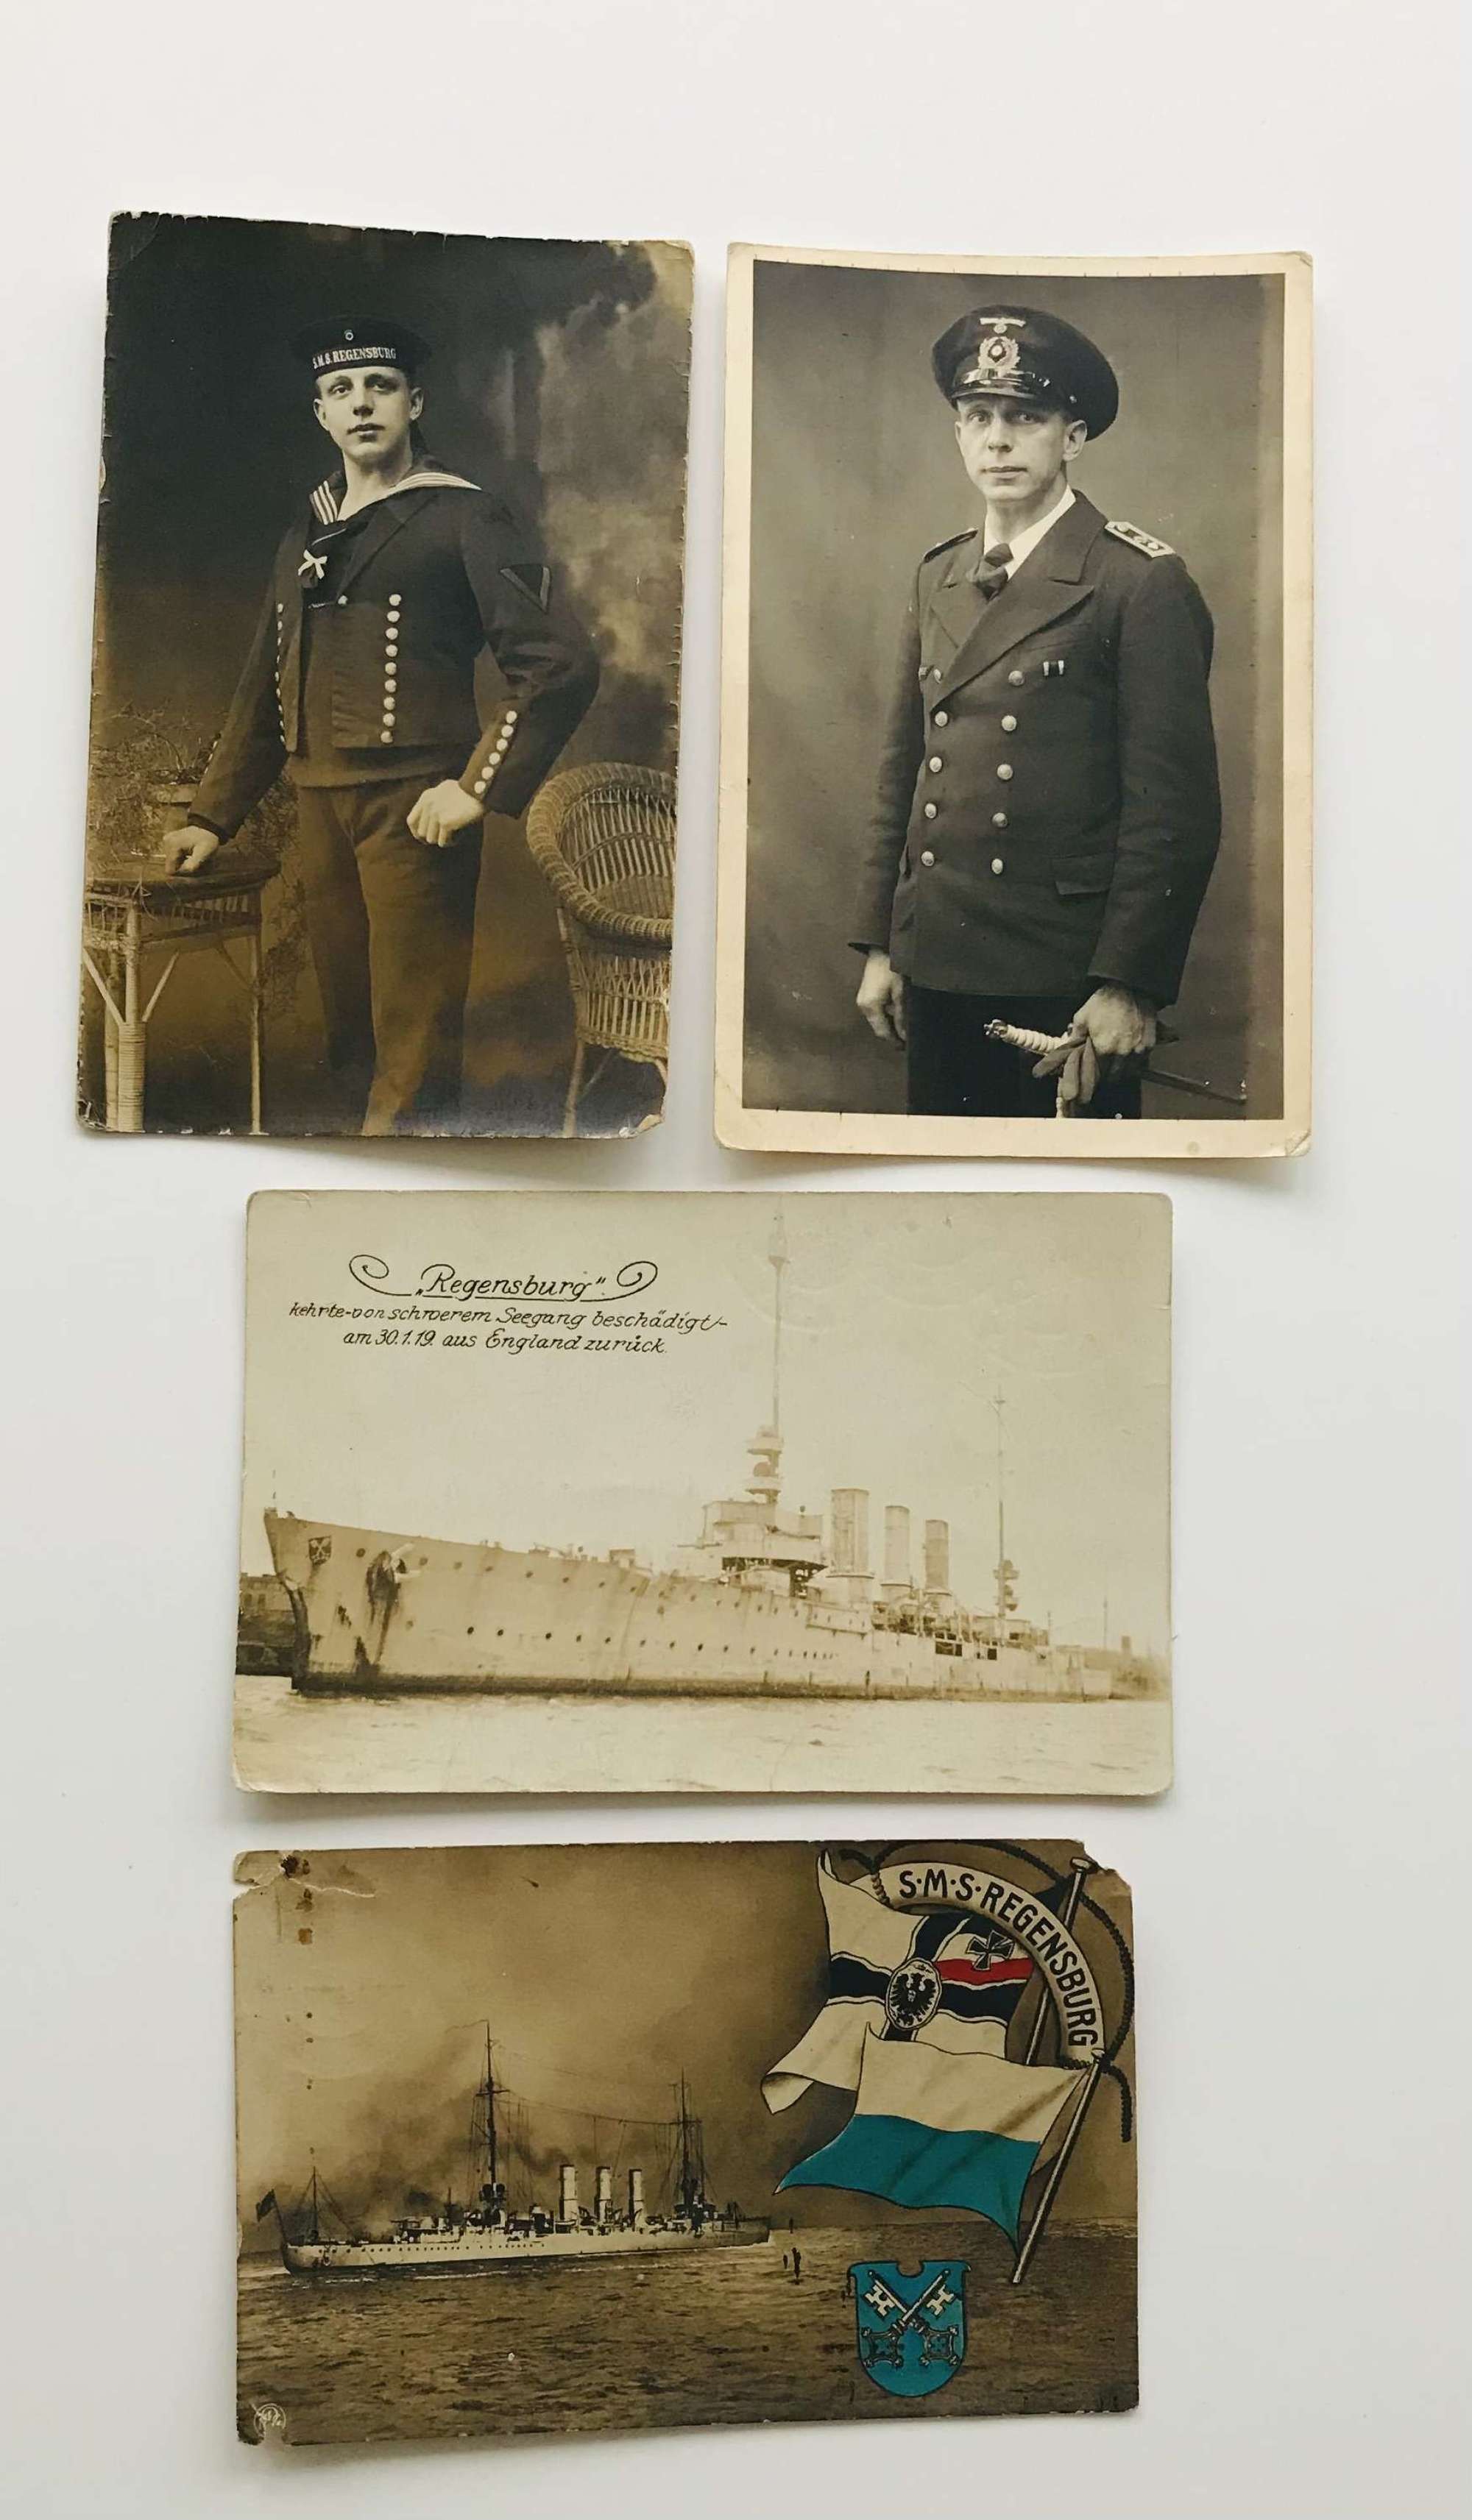 Four postcards of German Navy sailor from both conflicts